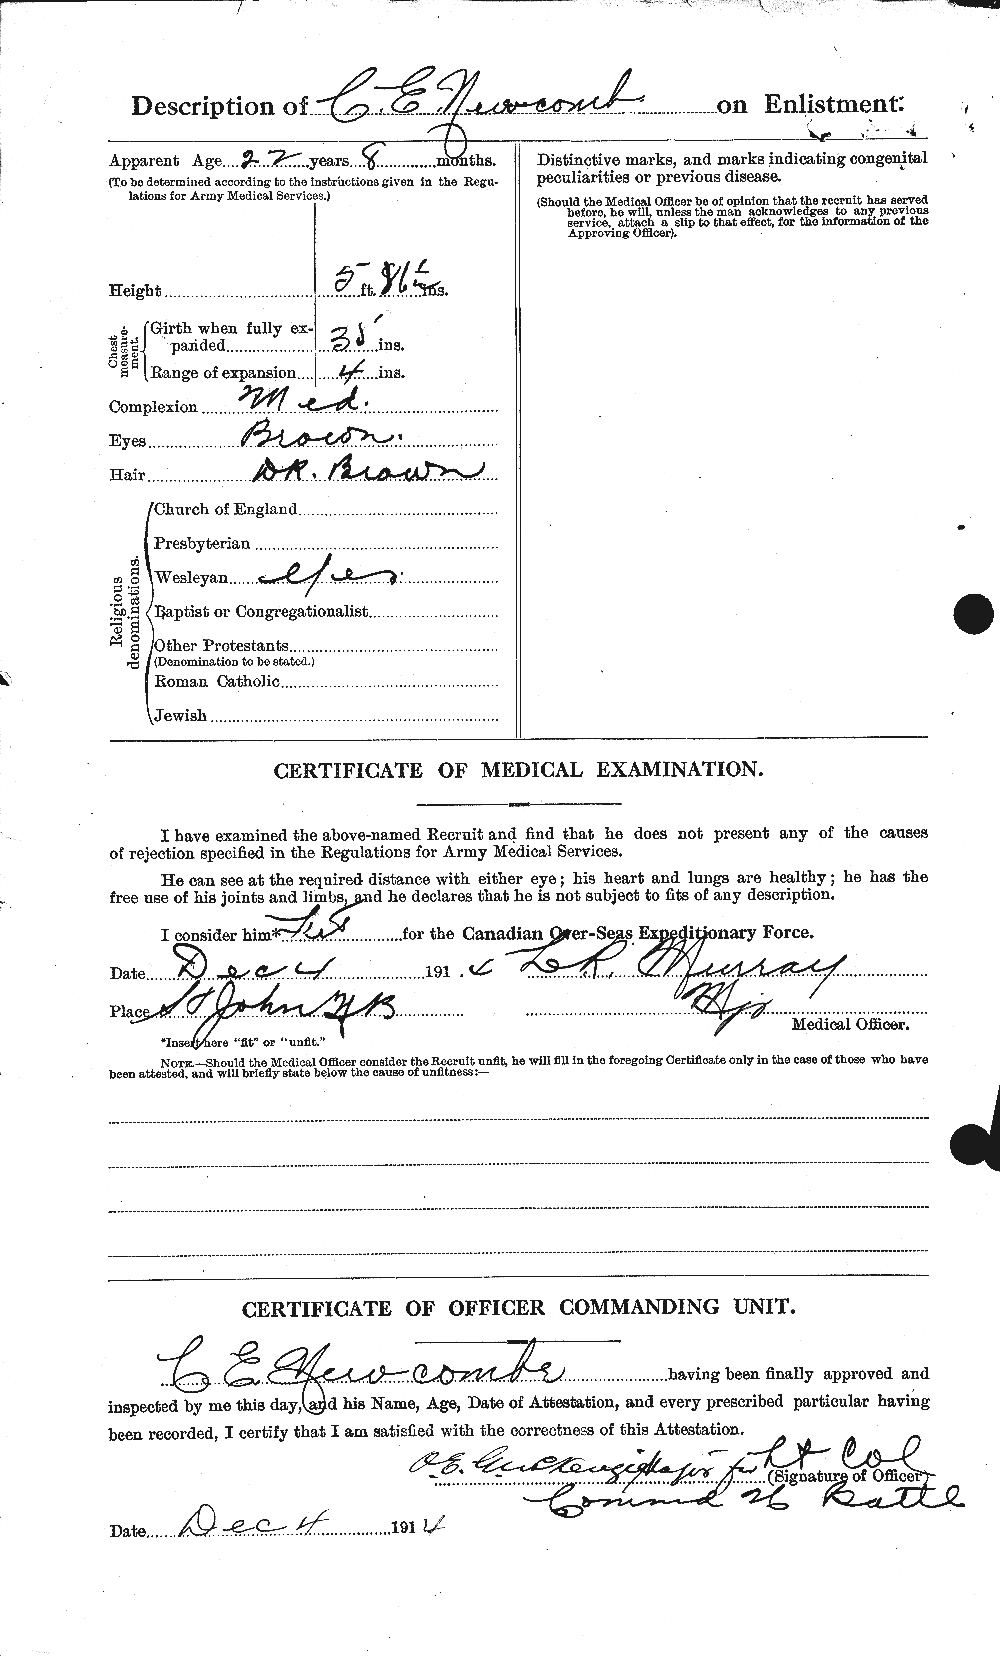 Personnel Records of the First World War - CEF 544157b